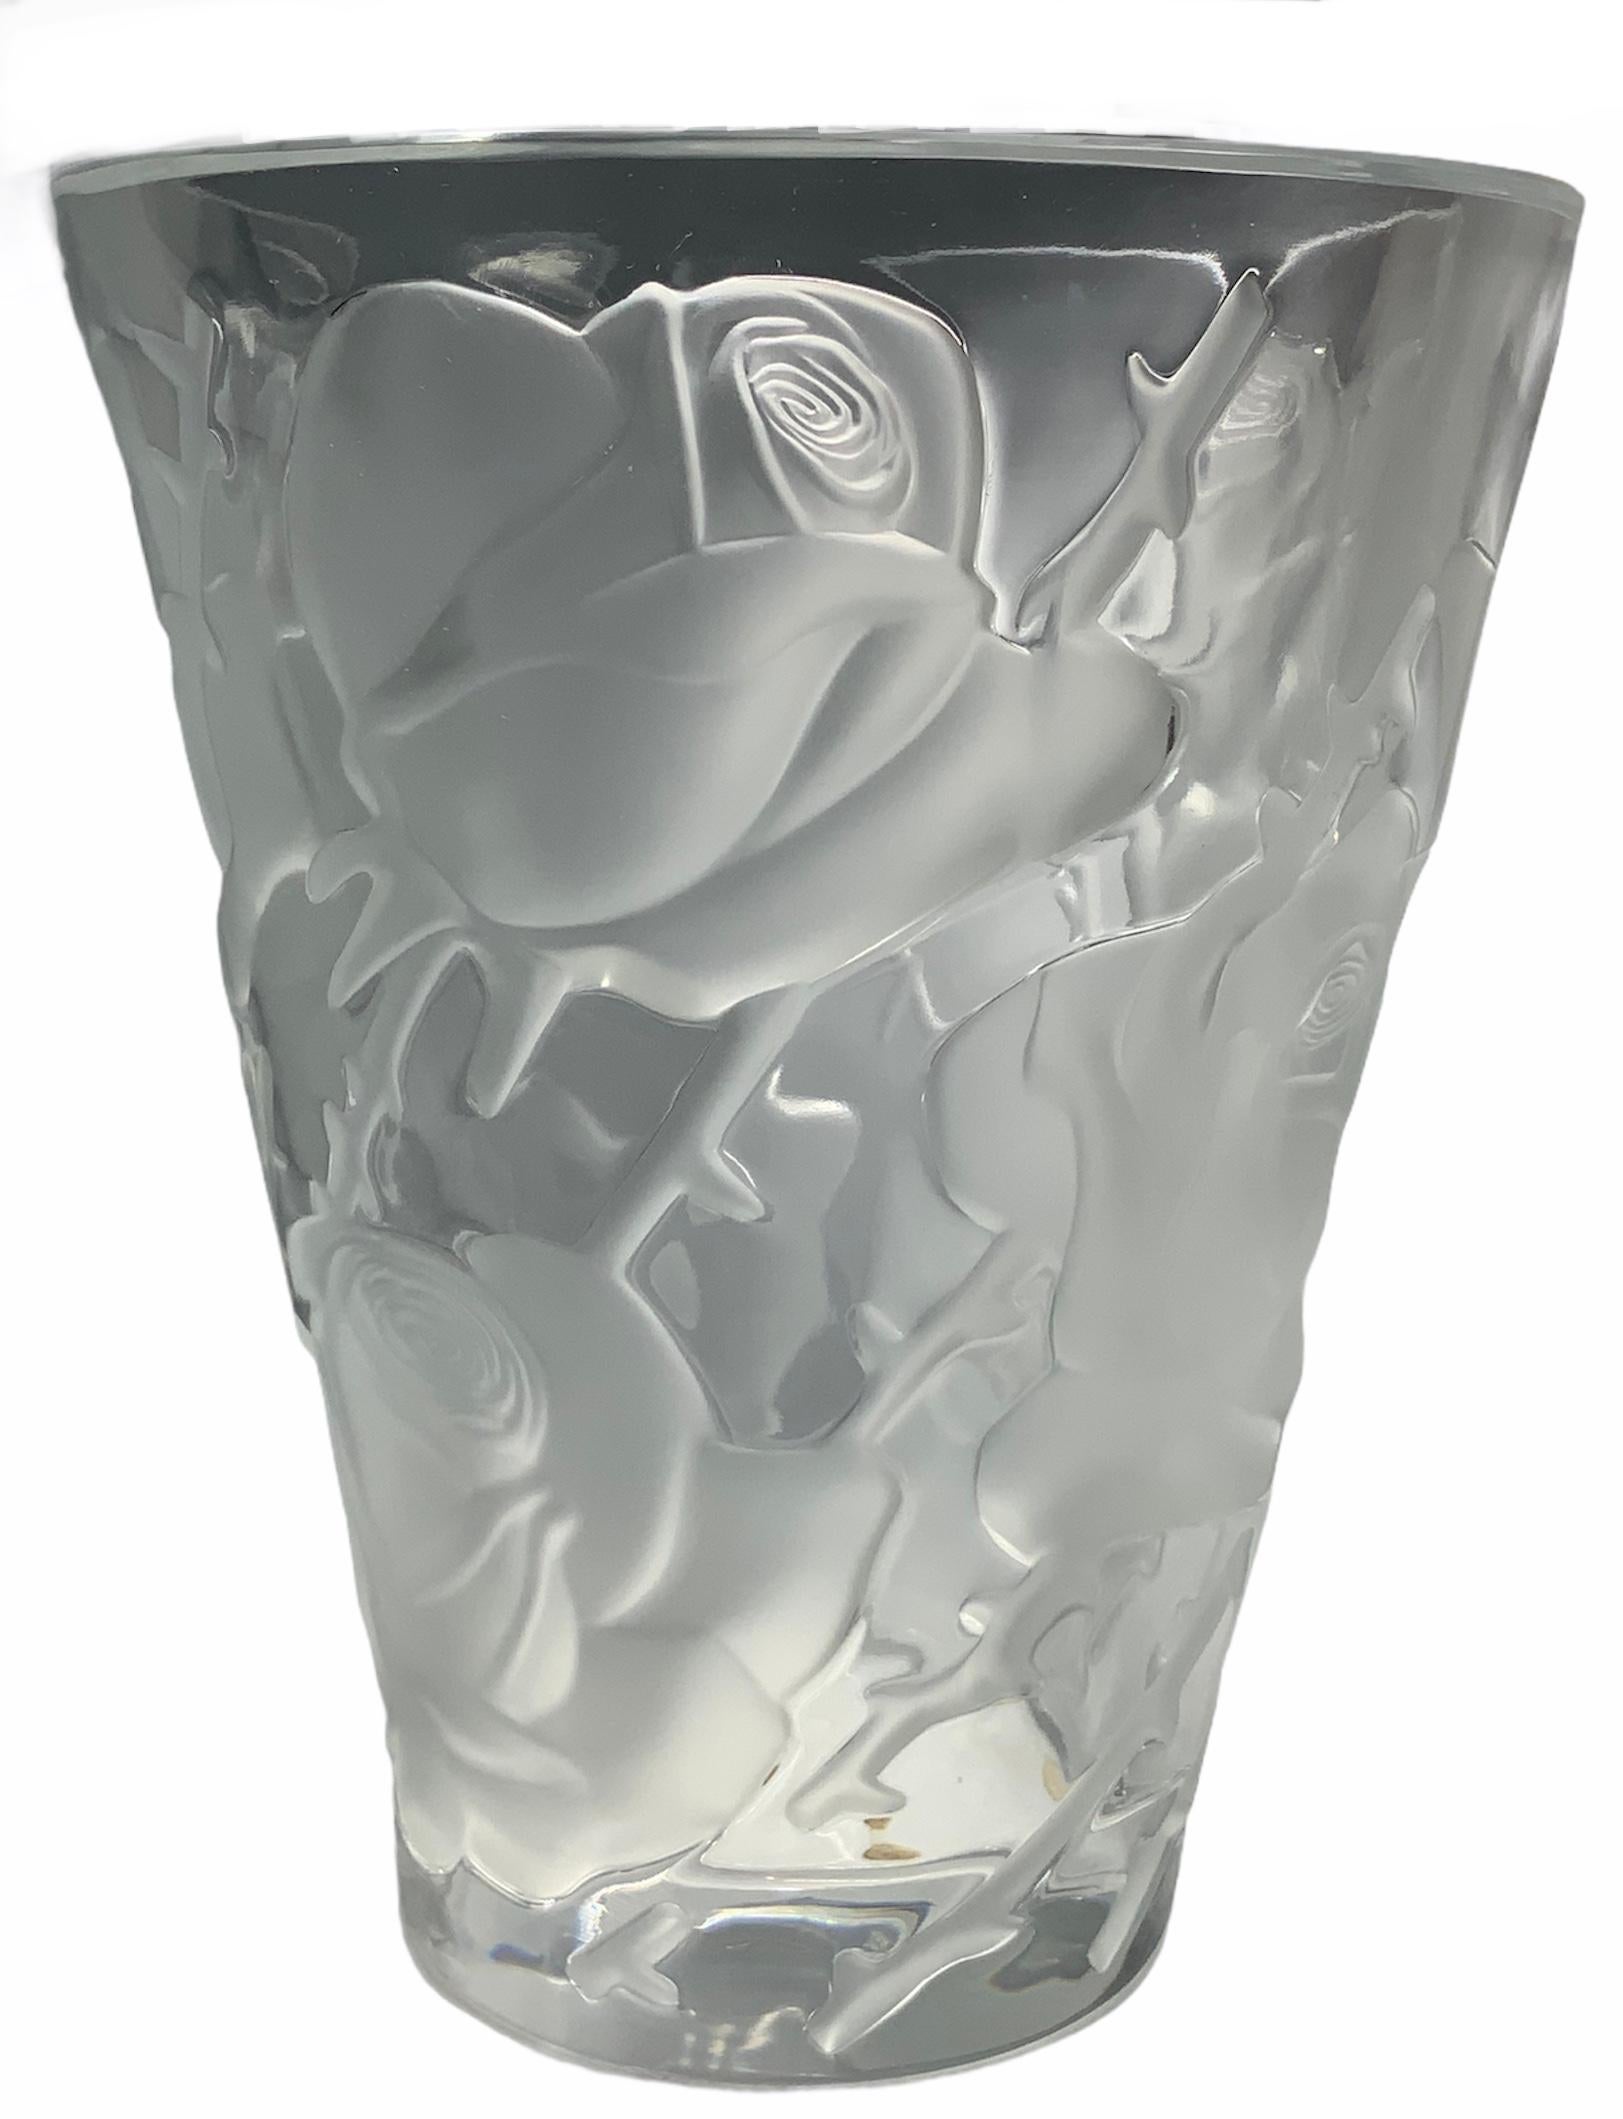 This is an upside down bell shaped, tall & wide flower crystal vase. It is adorned by engraved frosted branches of large roses all around. Under the base is marked Lalique, an encircle R & France.